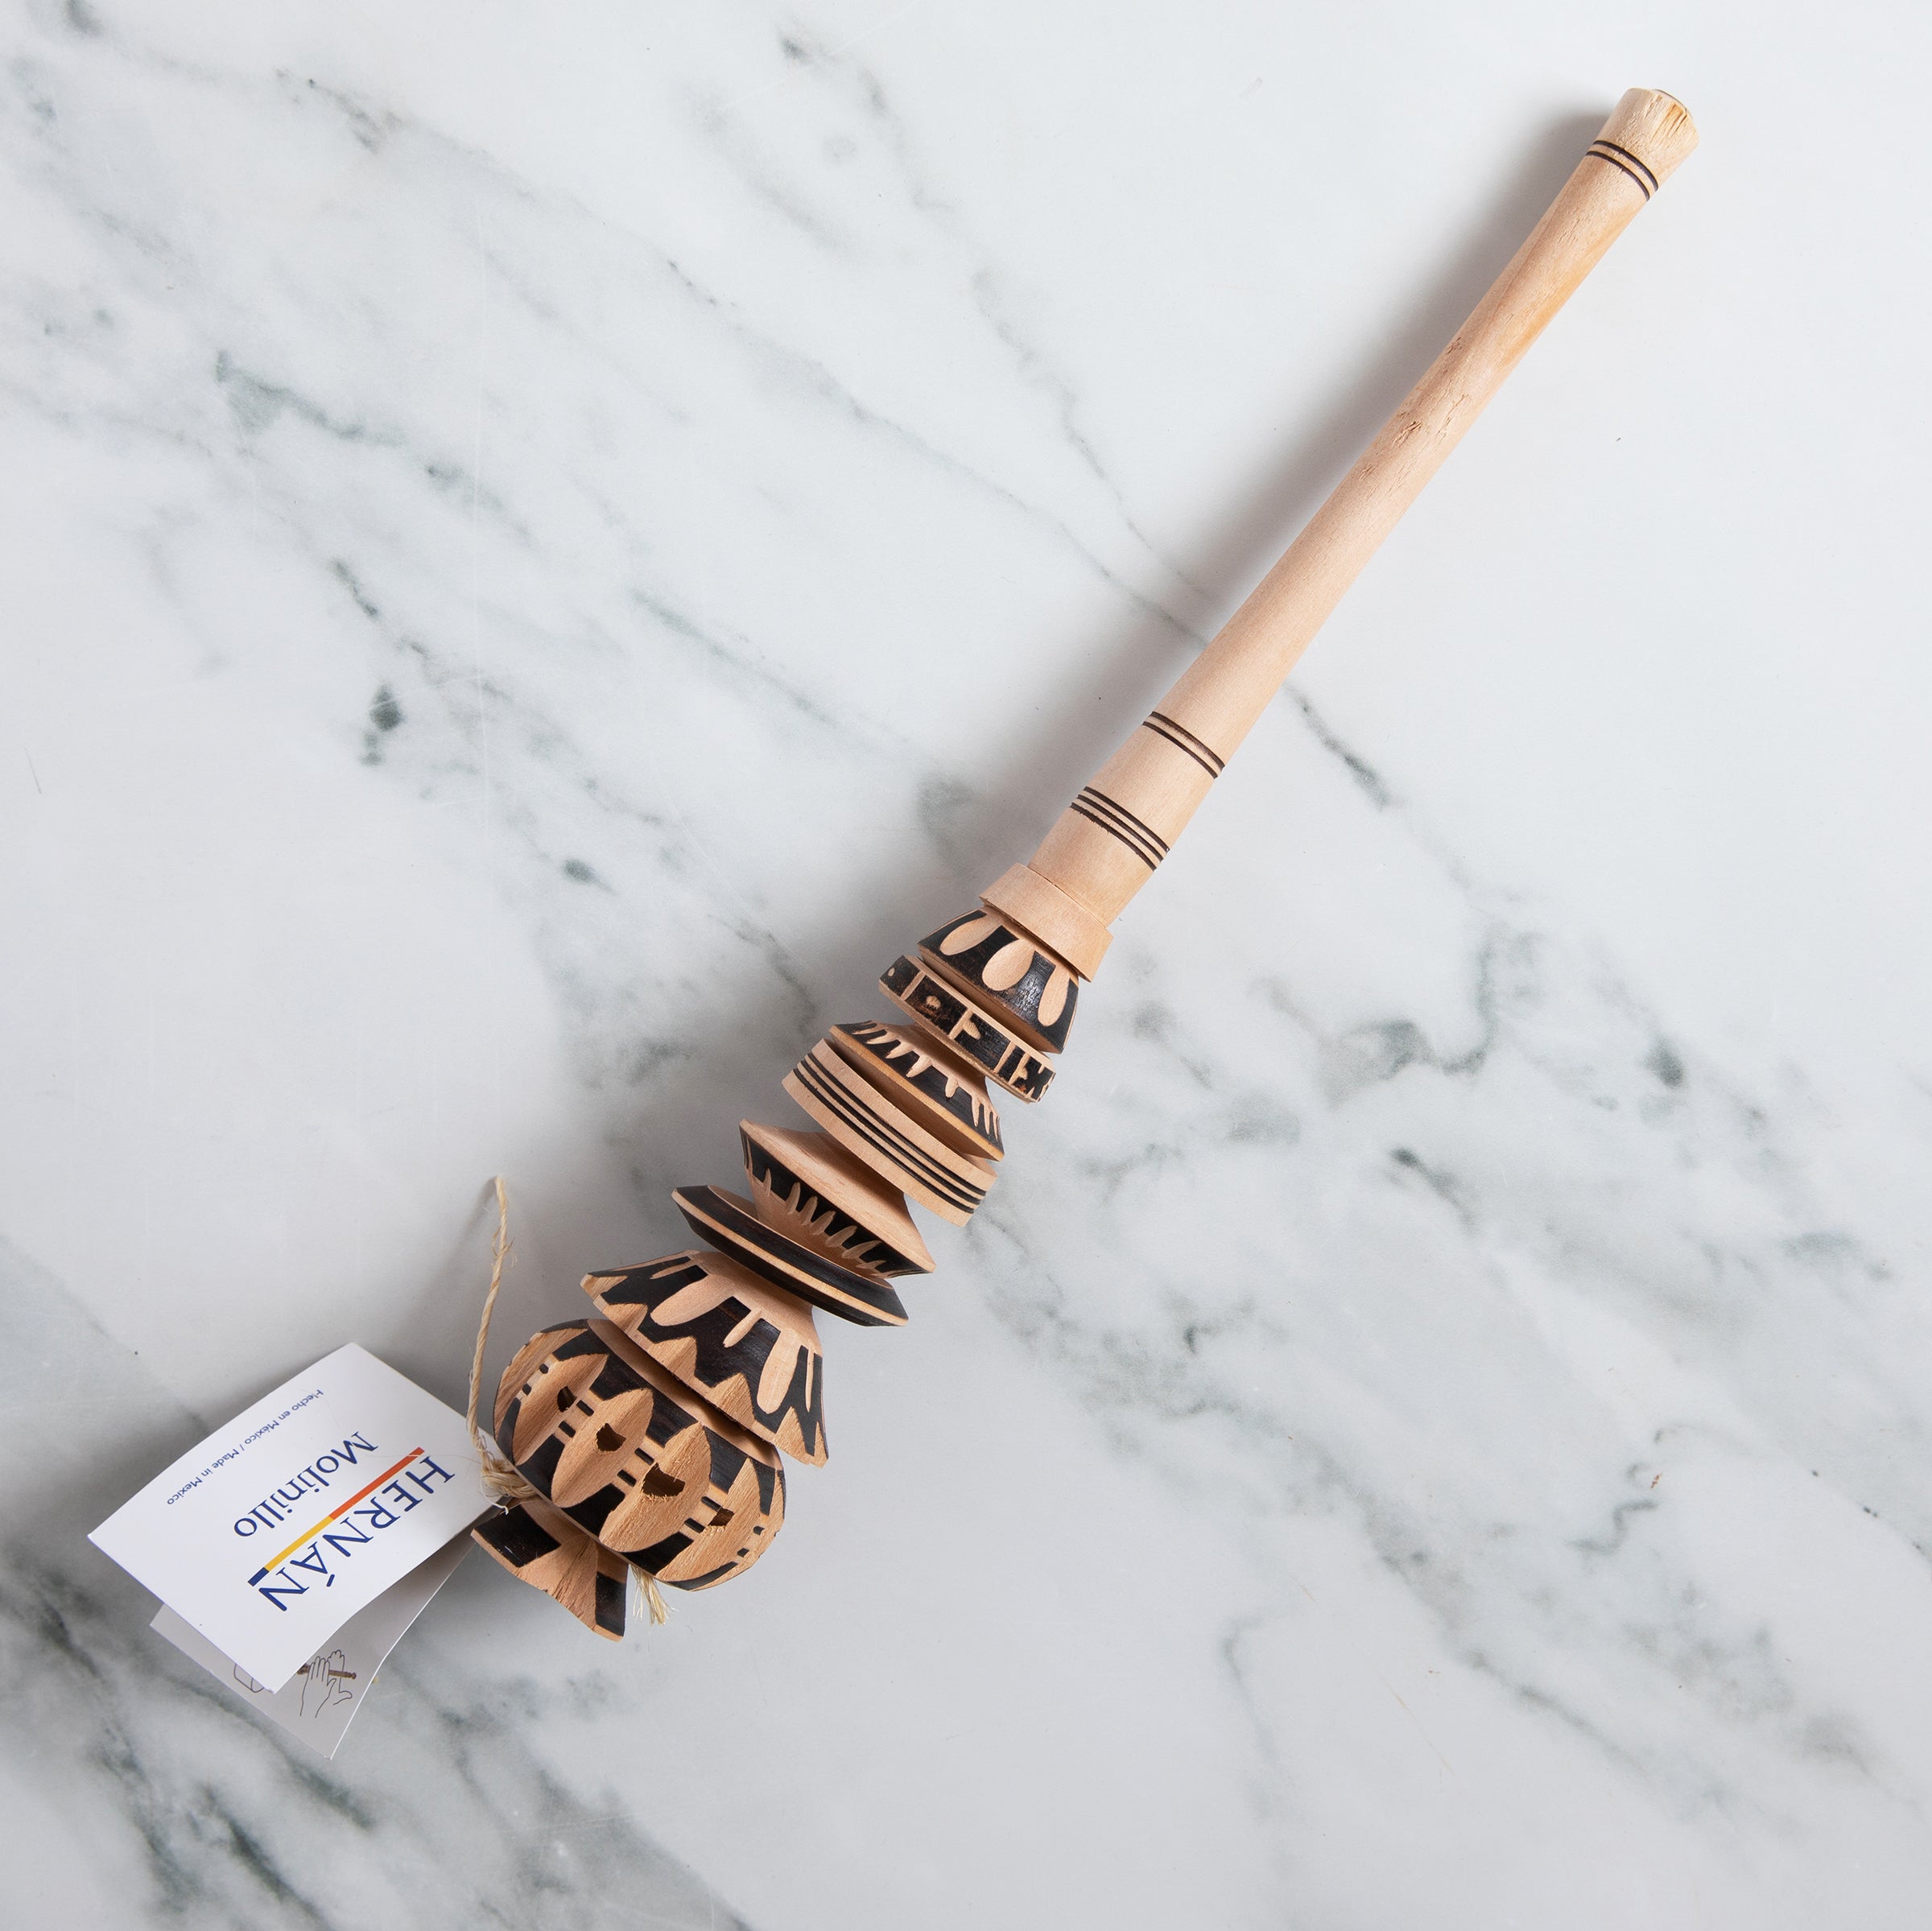 1 Wooden Frother Whisk Stirrer Molinillo Mexican Hot Chocolate